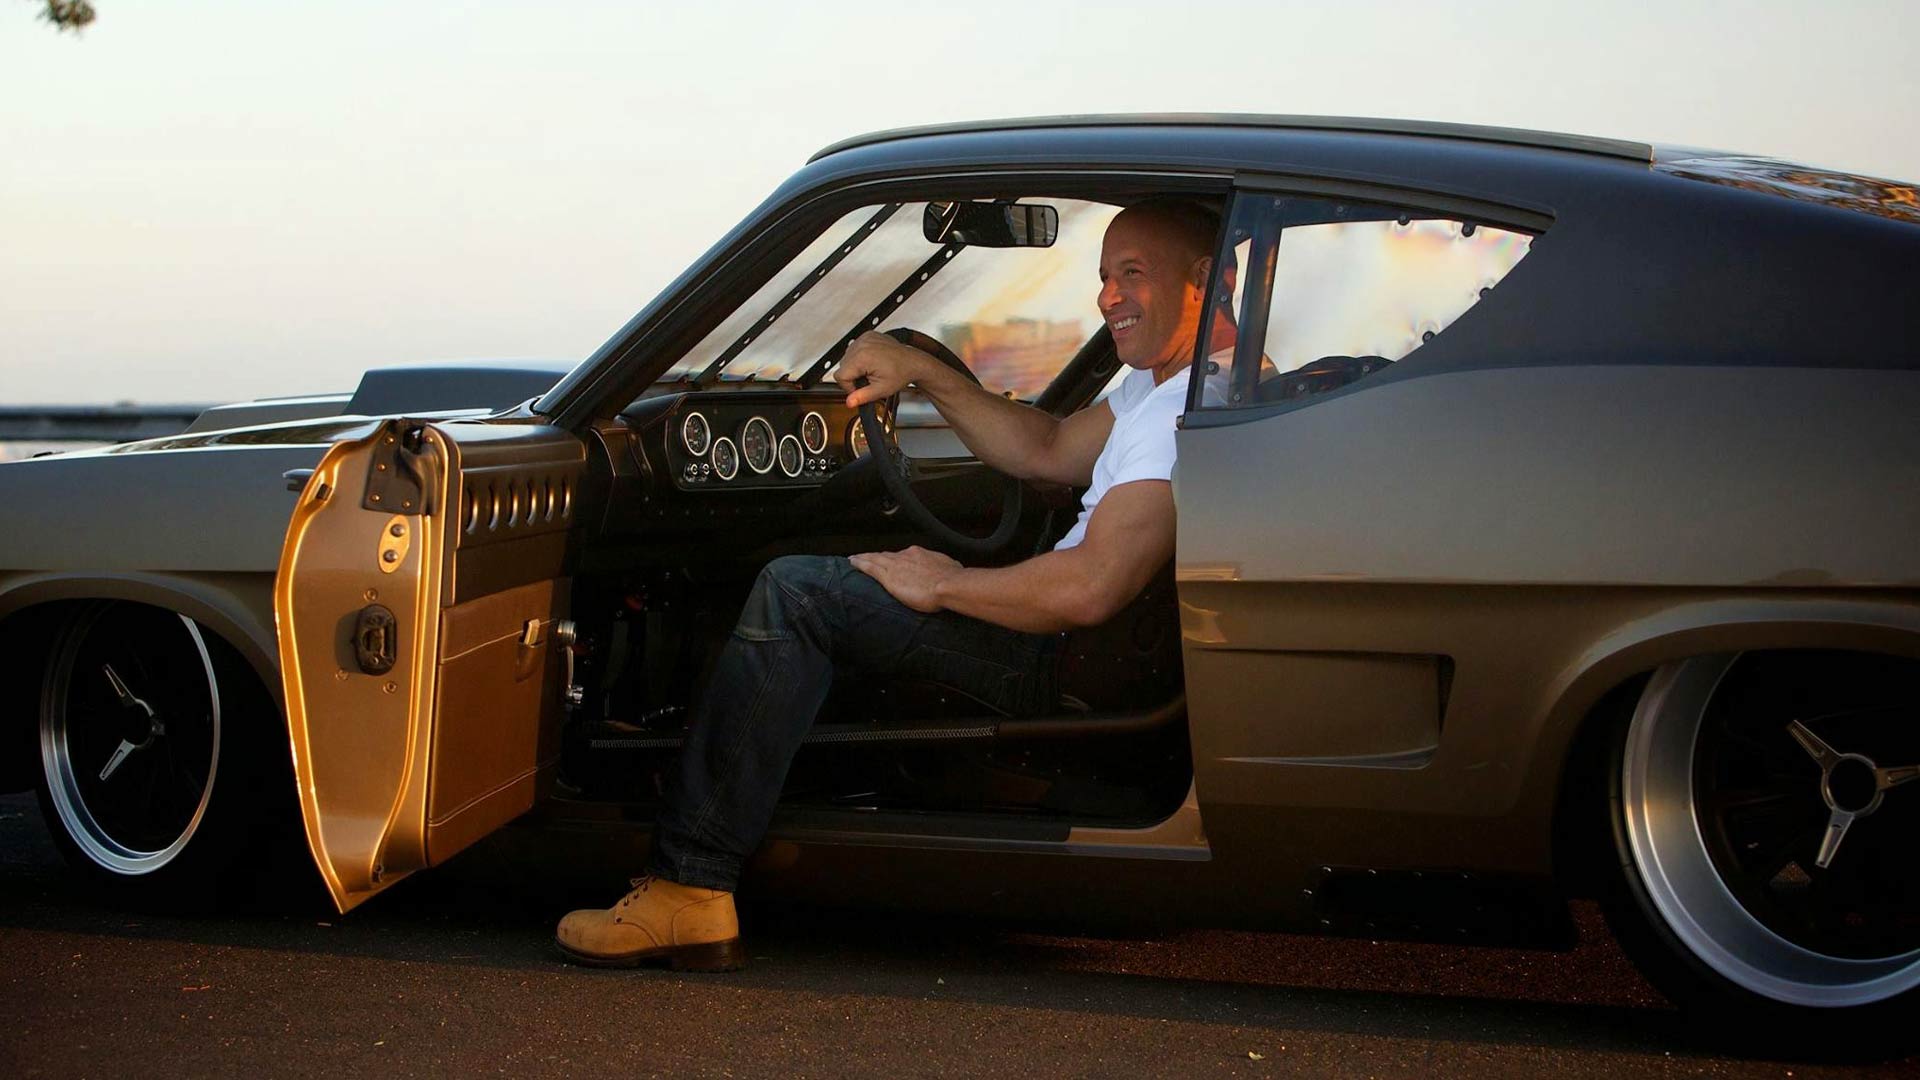 Fast and furious 7 cars wallpapers – Free full hd wallpapers for ...